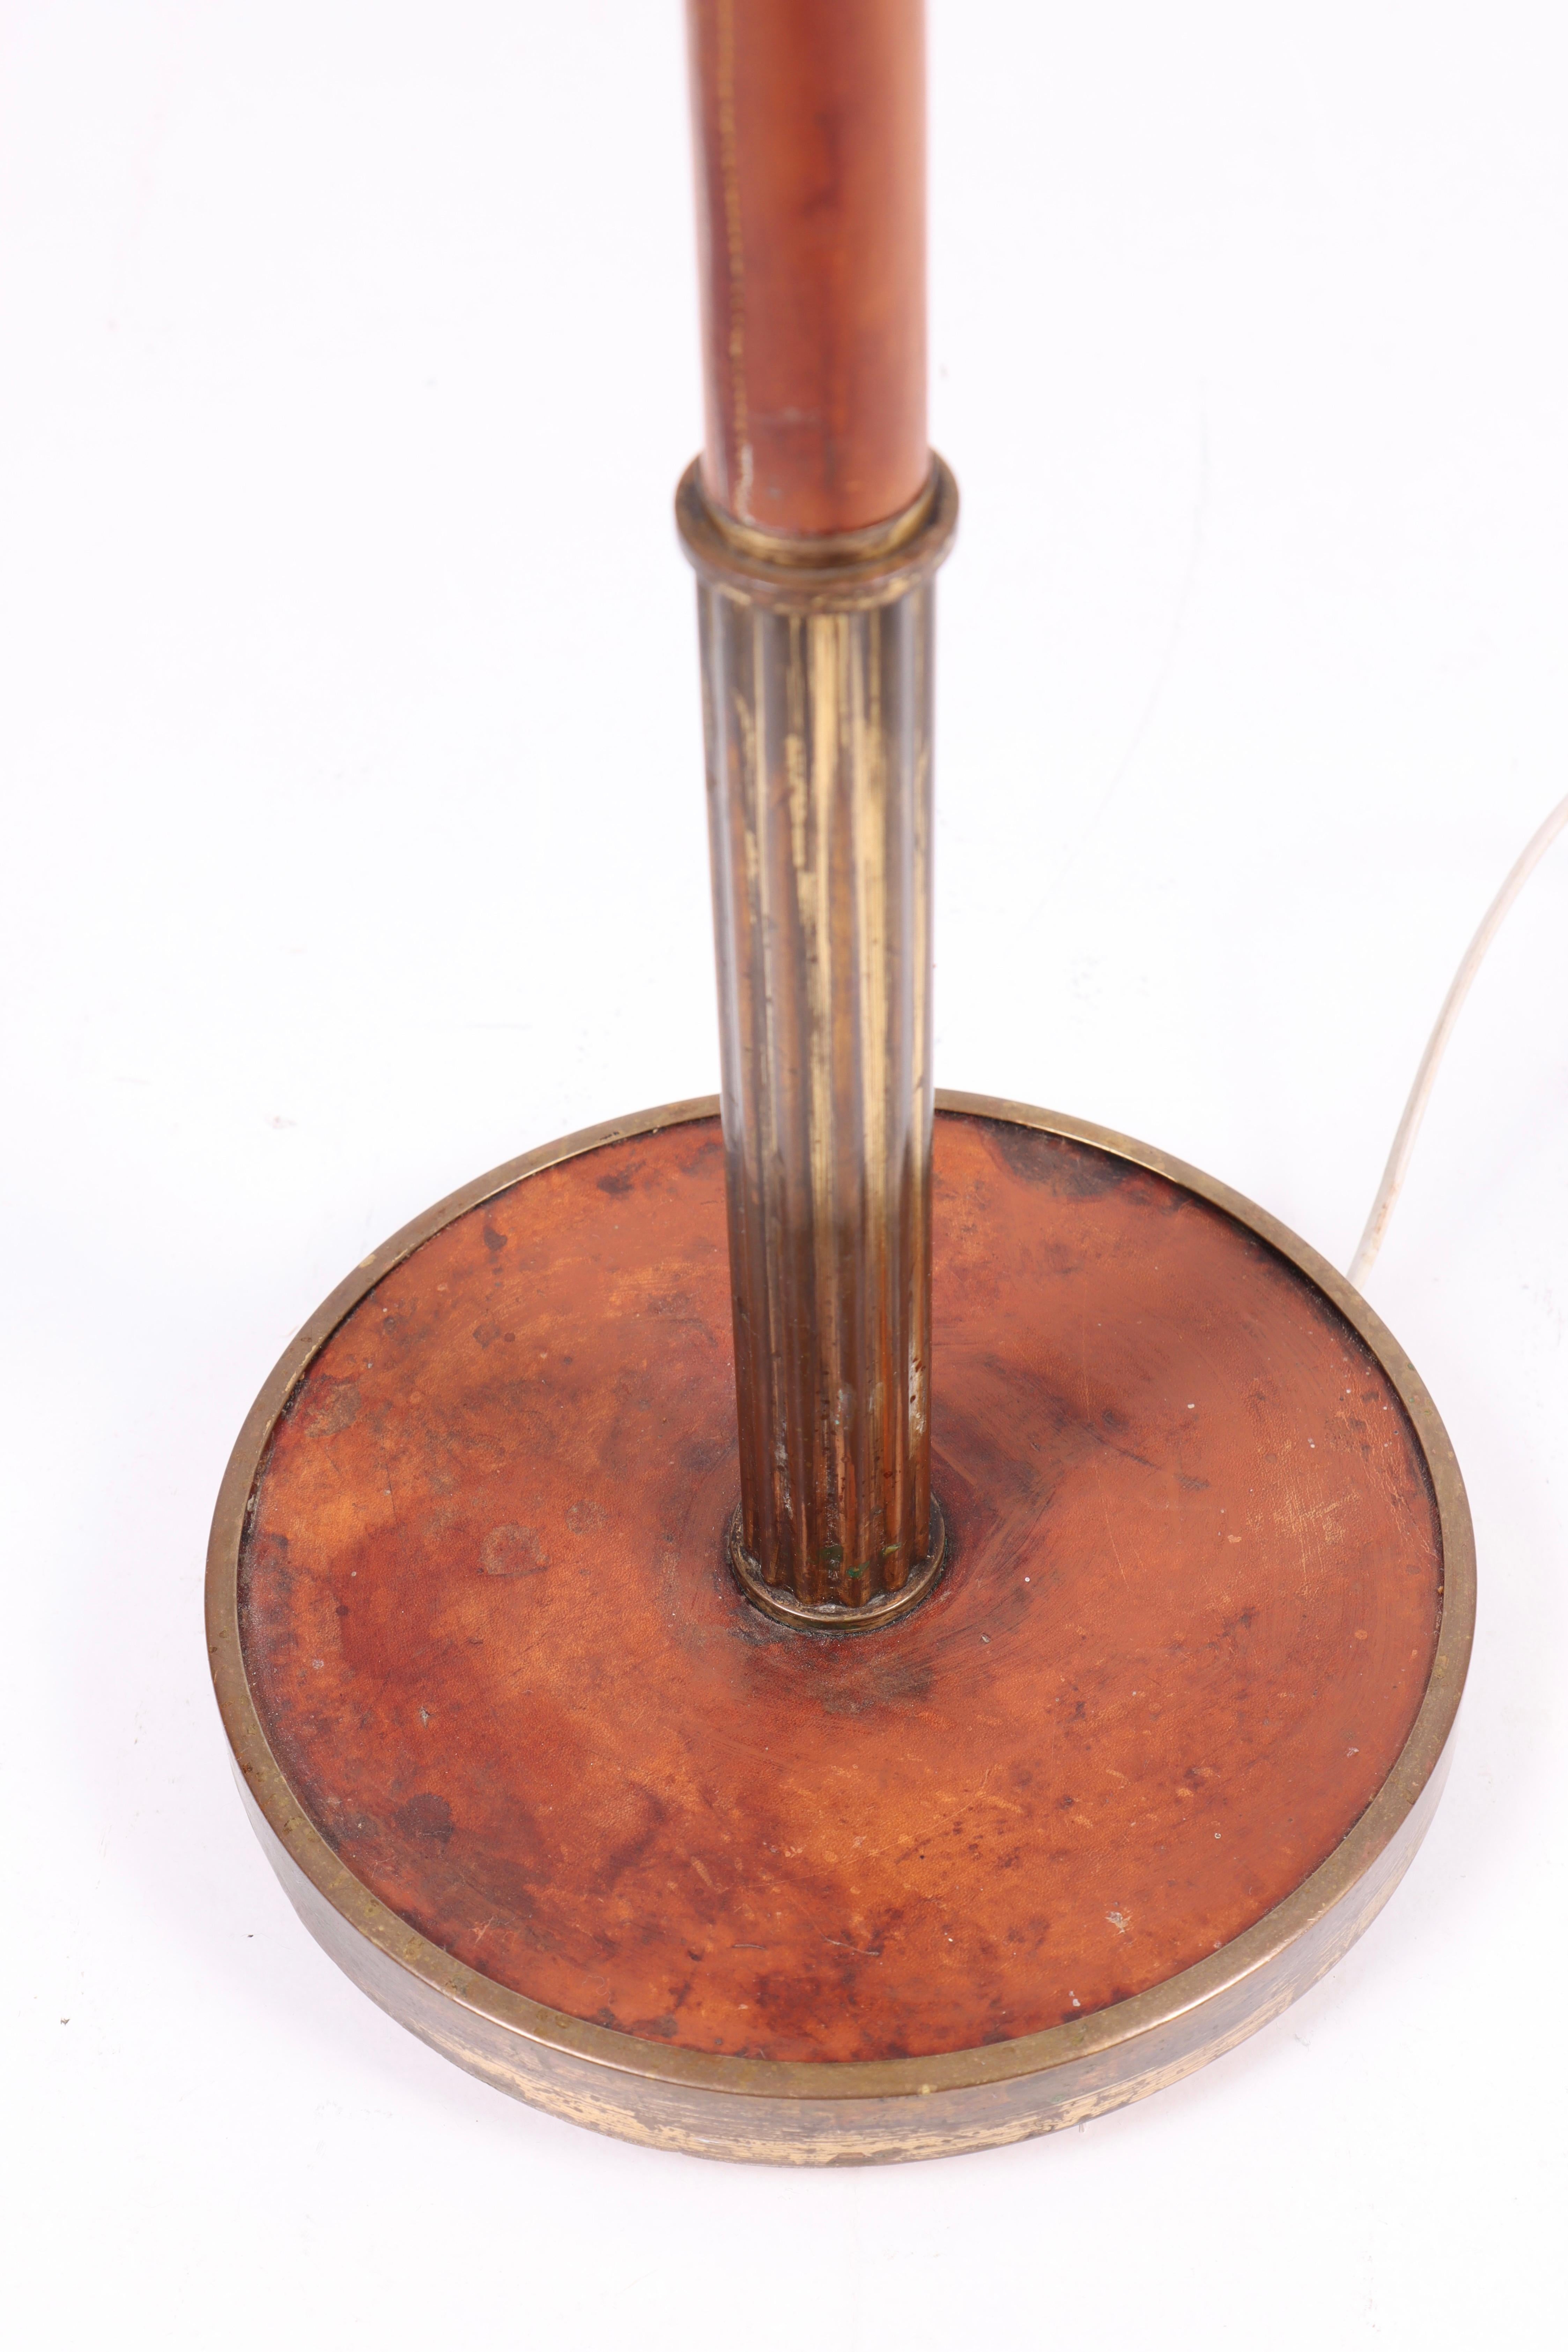 Elegant Floor Lamp in Patinated Brass and Leather, Swedish Modern, 1940s For Sale 2